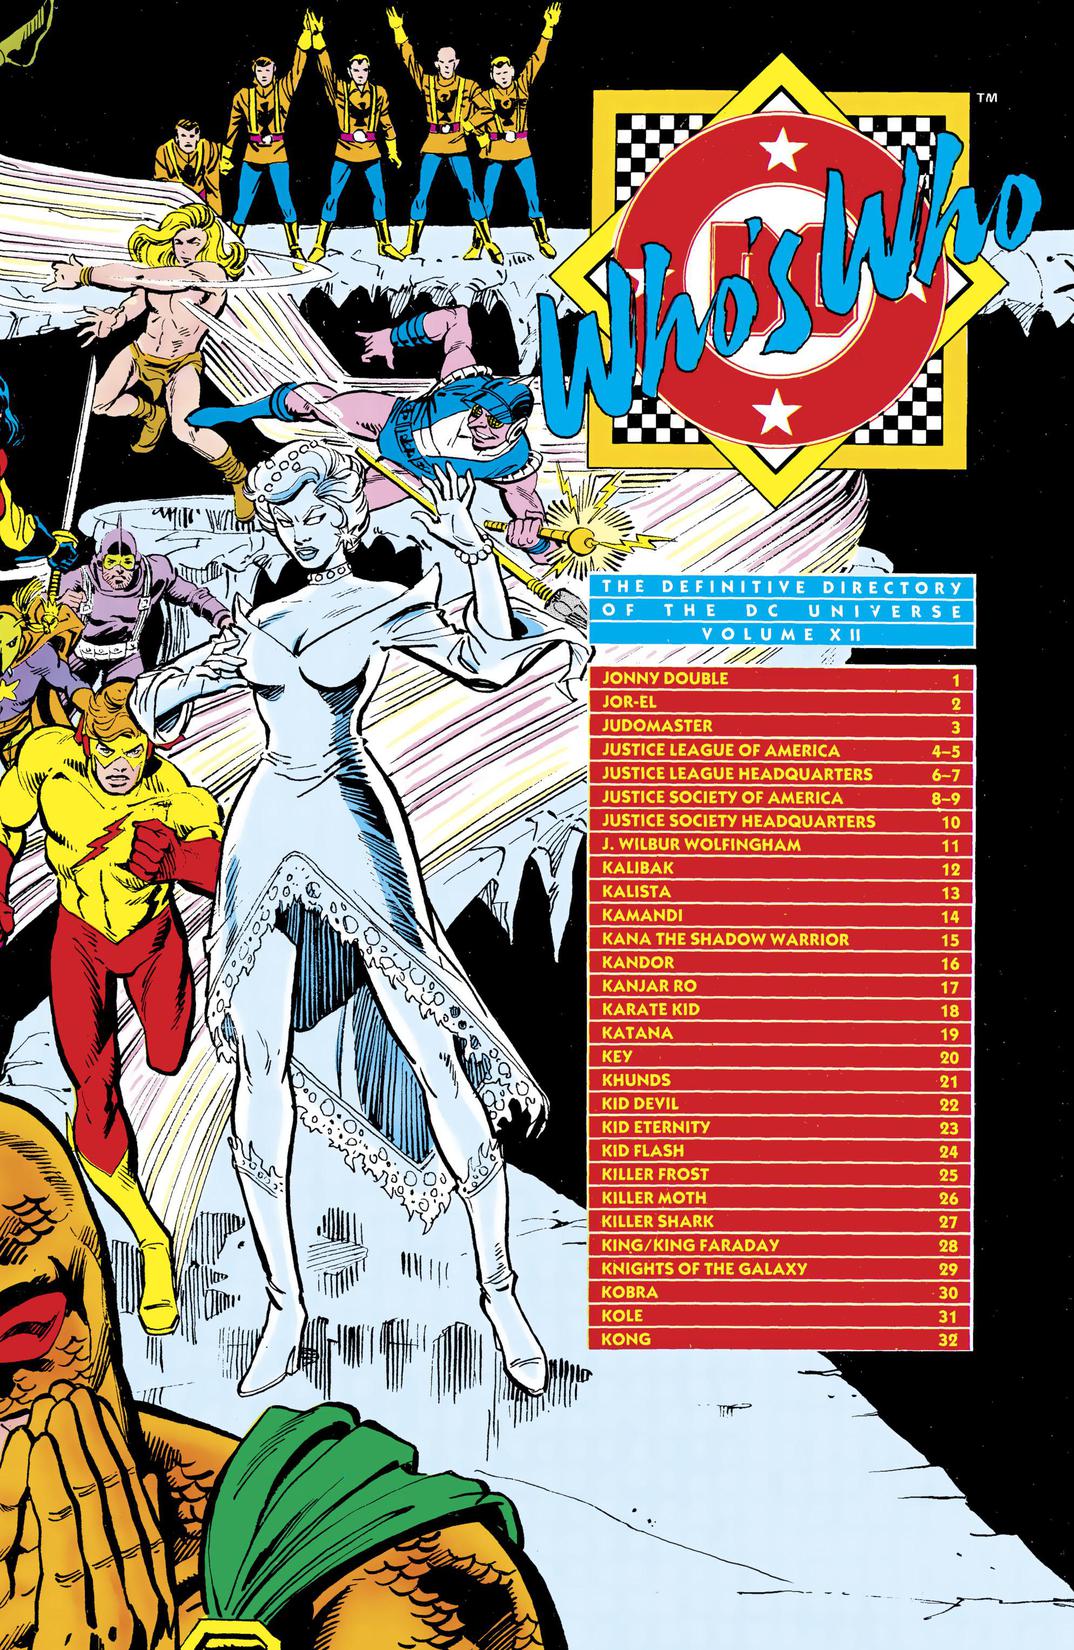 Who's Who: The Definitive Directory of the DC Universe #12 preview images